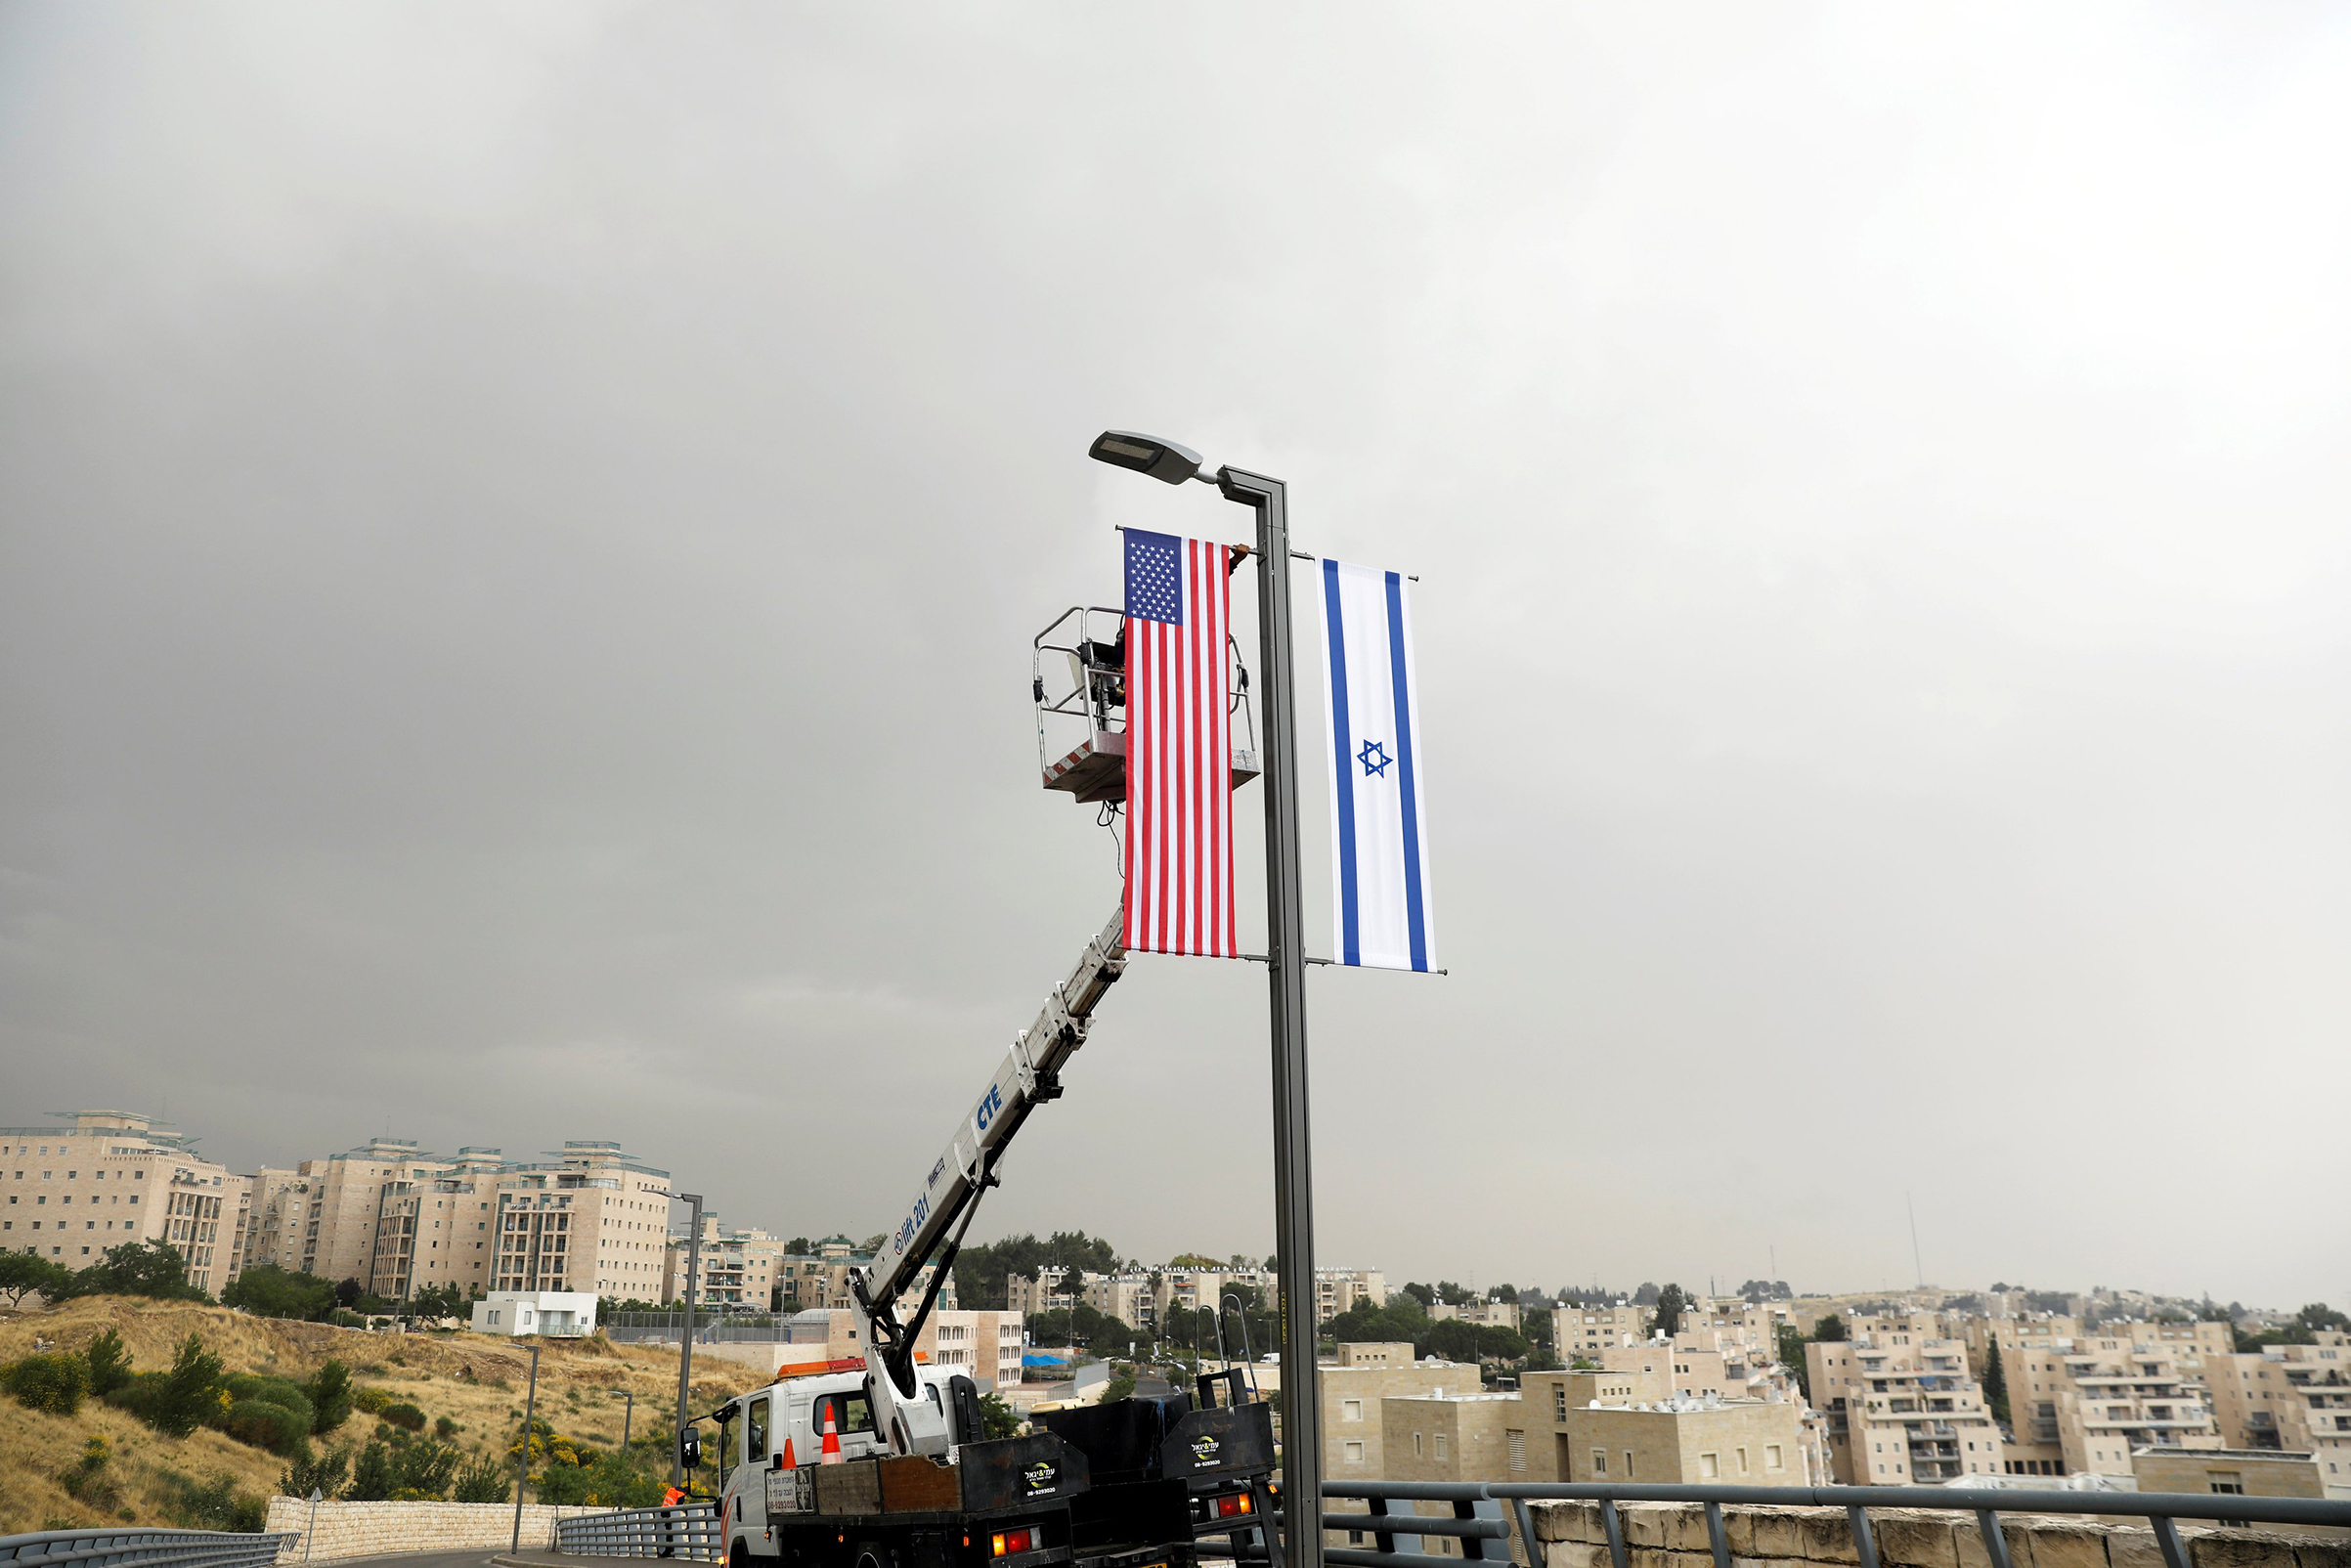 A worker on a crane hangs a U.S. flag alongside an Israeli flag, next to the entrance to the U.S. consulate in Jerusalem, on May 7, 2018. (Ronen Zvulun—Reuters)